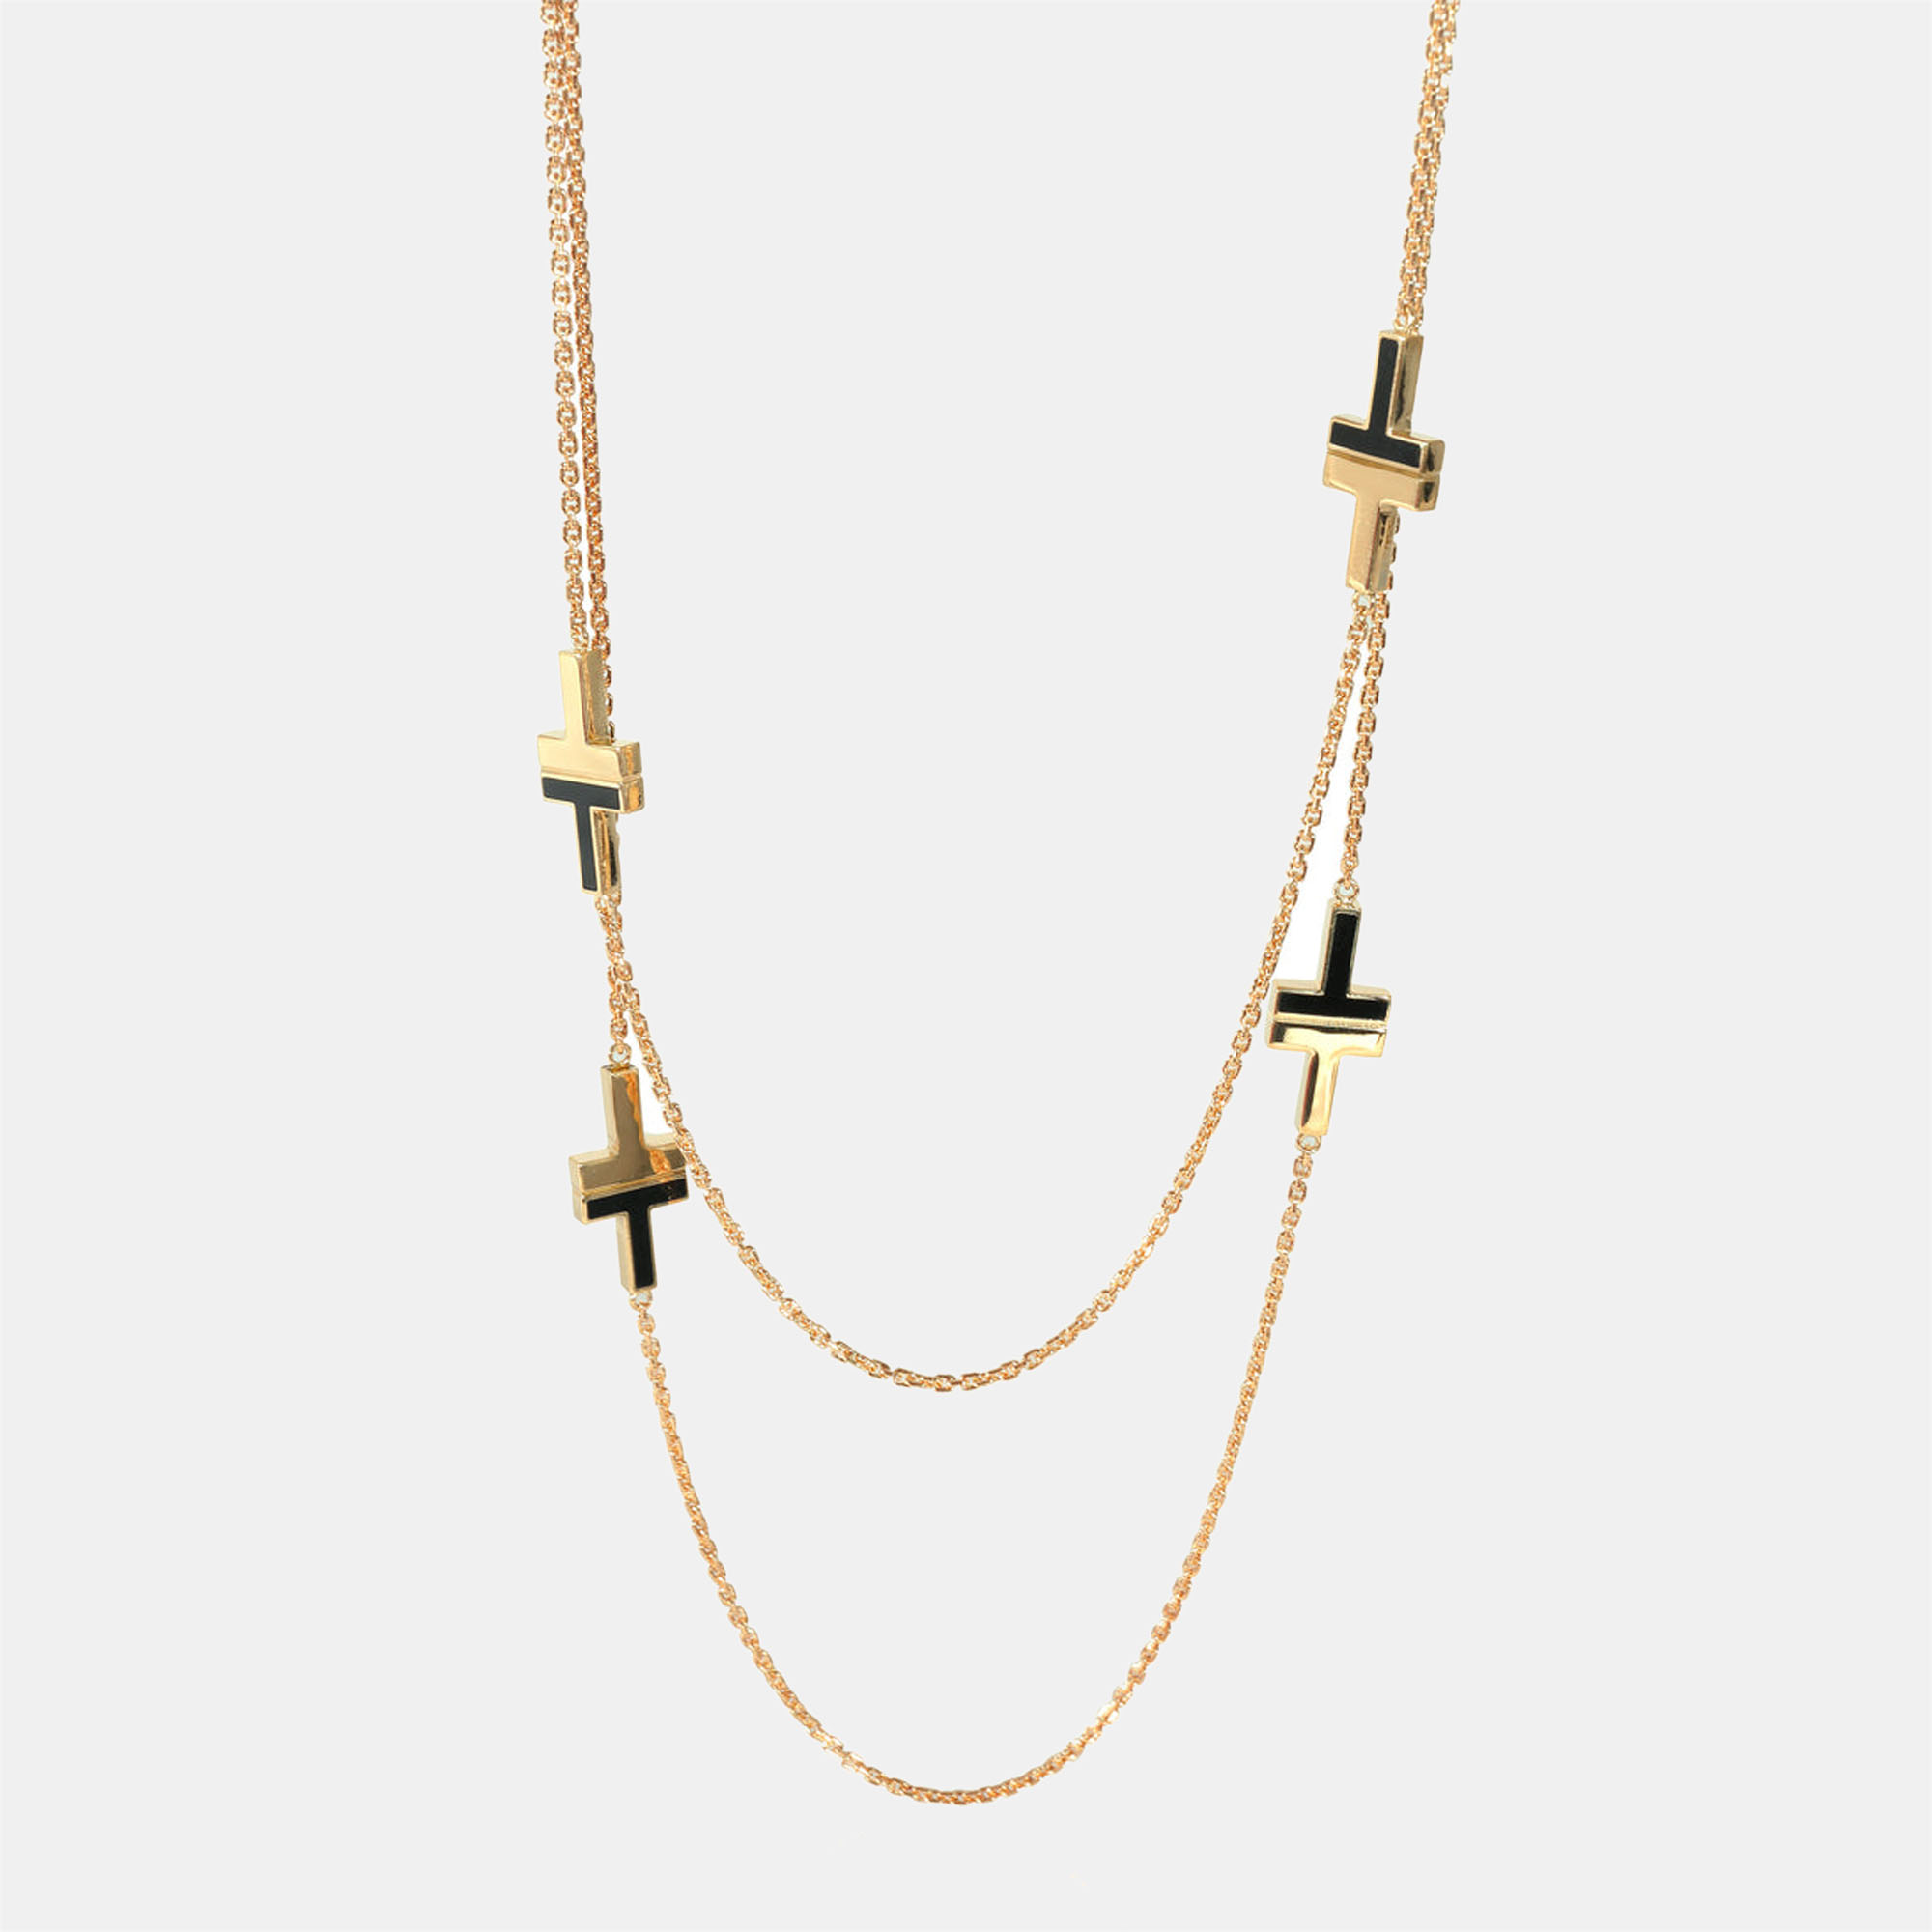 Tiffany T Black Onyx Station Necklace In 18k Yellow Gold